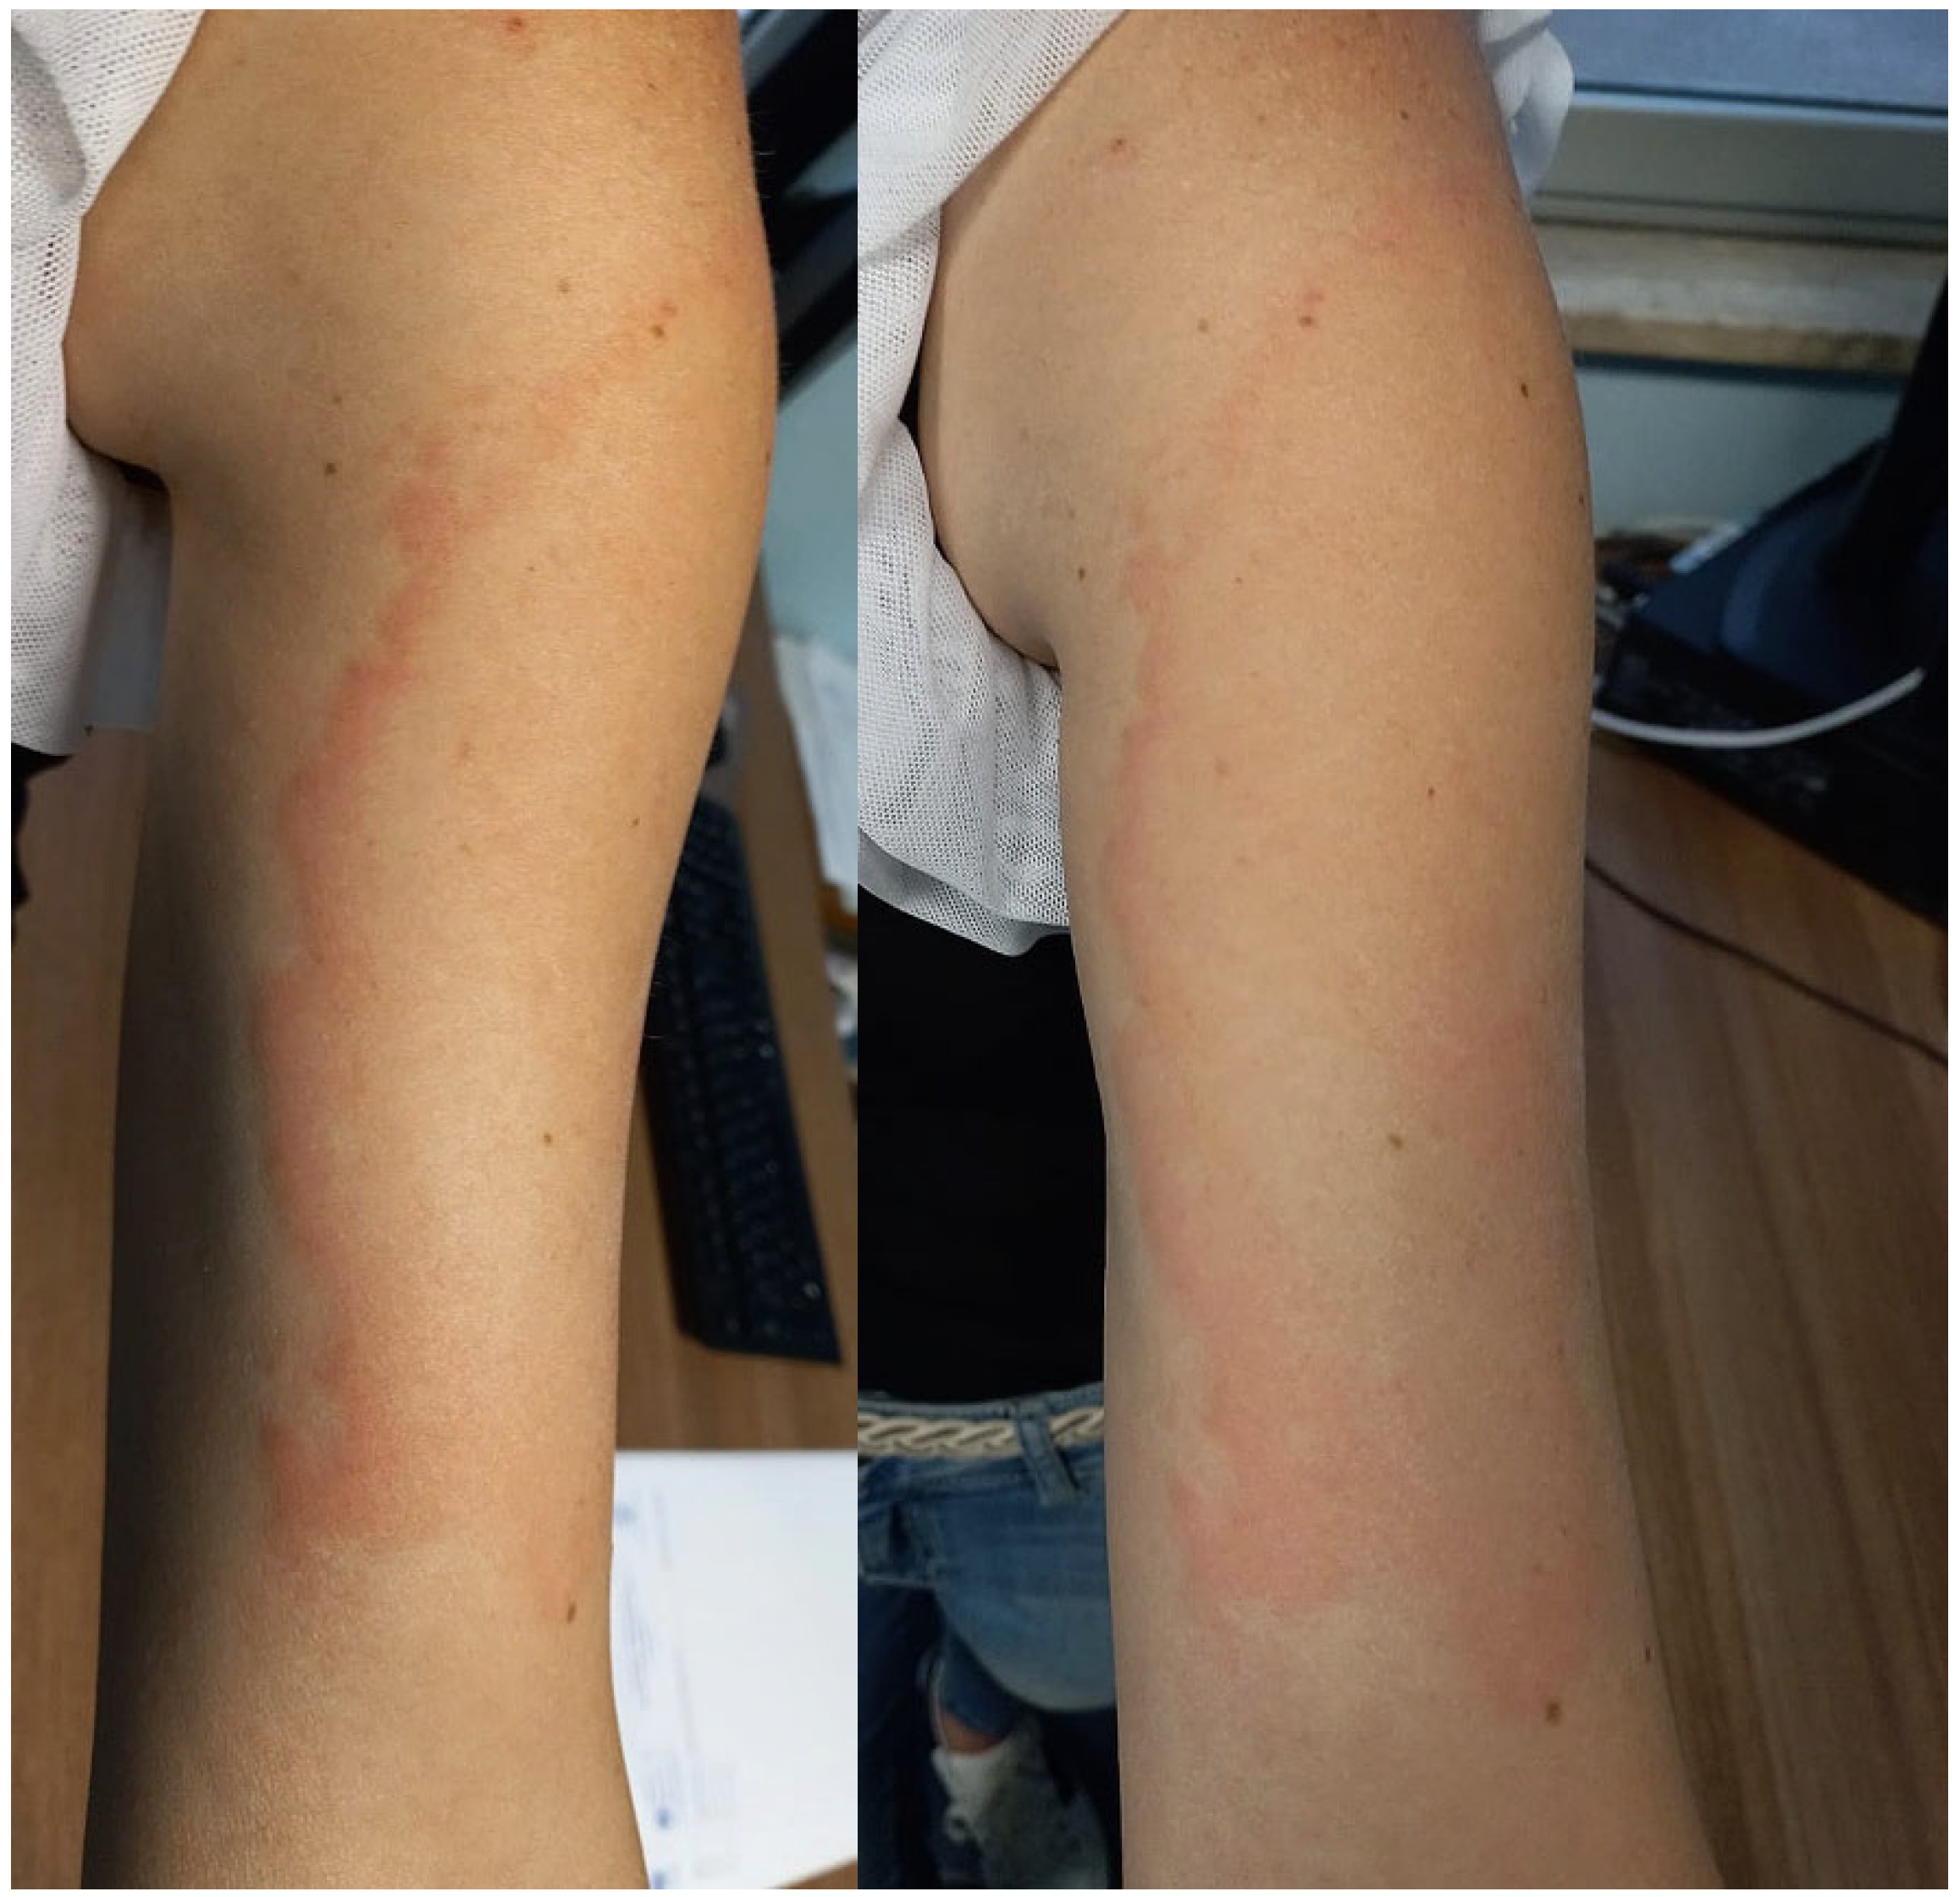 JCM | Free Full-Text | Erythema Migrans-like COVID Vaccine Arm: A  Literature Review